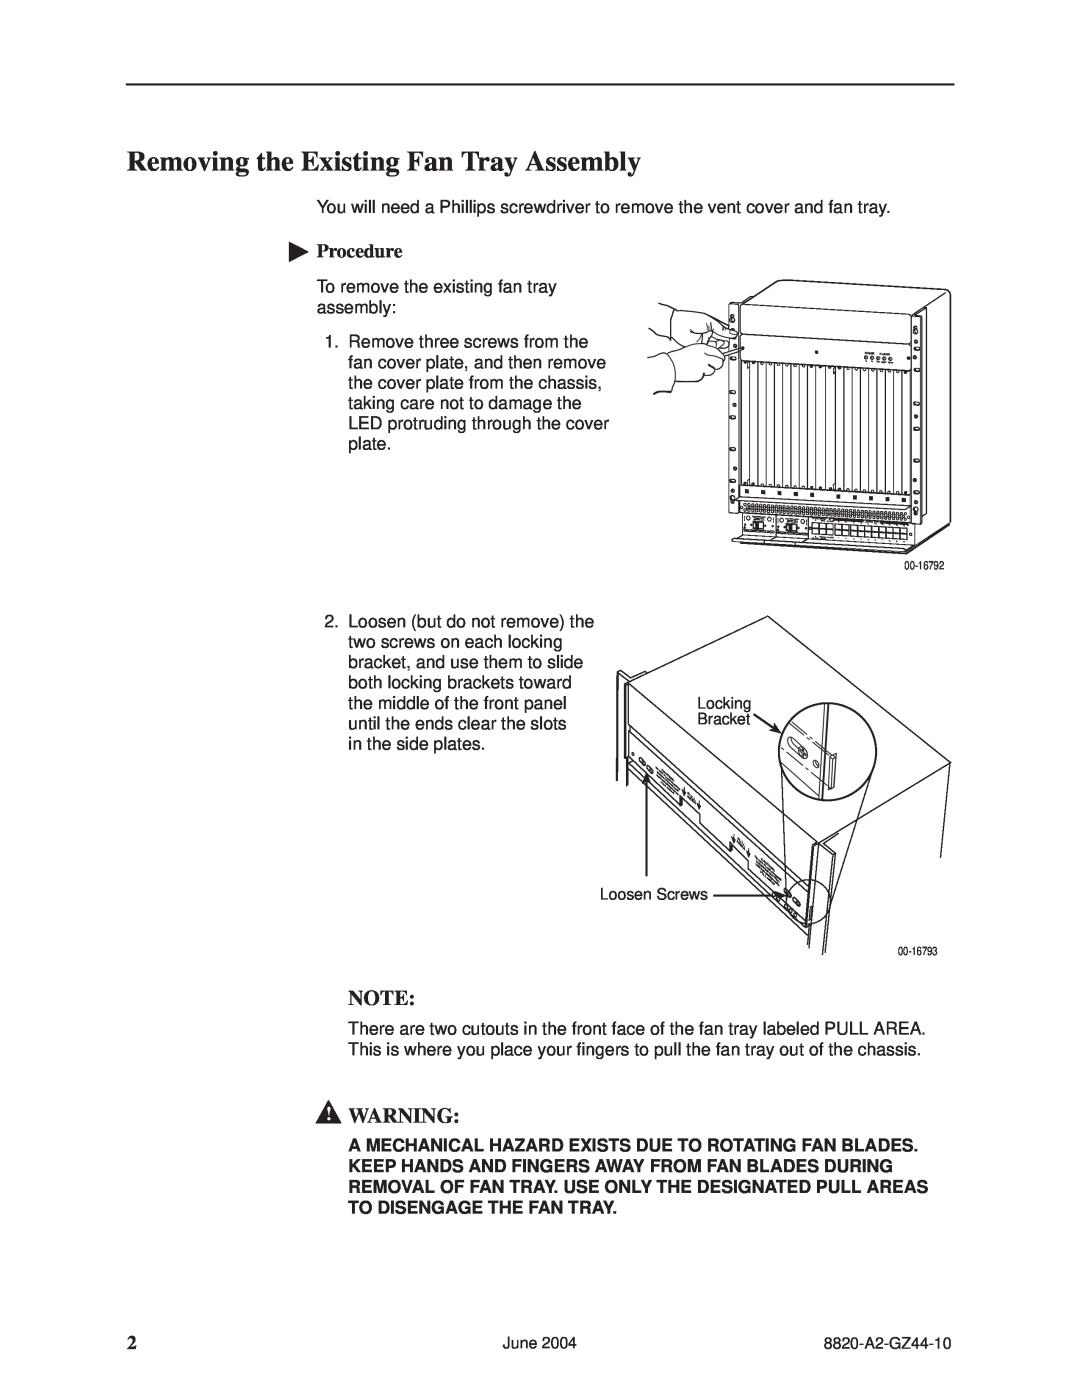 Paradyne 8820-S2-900 installation instructions Removing the Existing Fan Tray Assembly, Procedure 